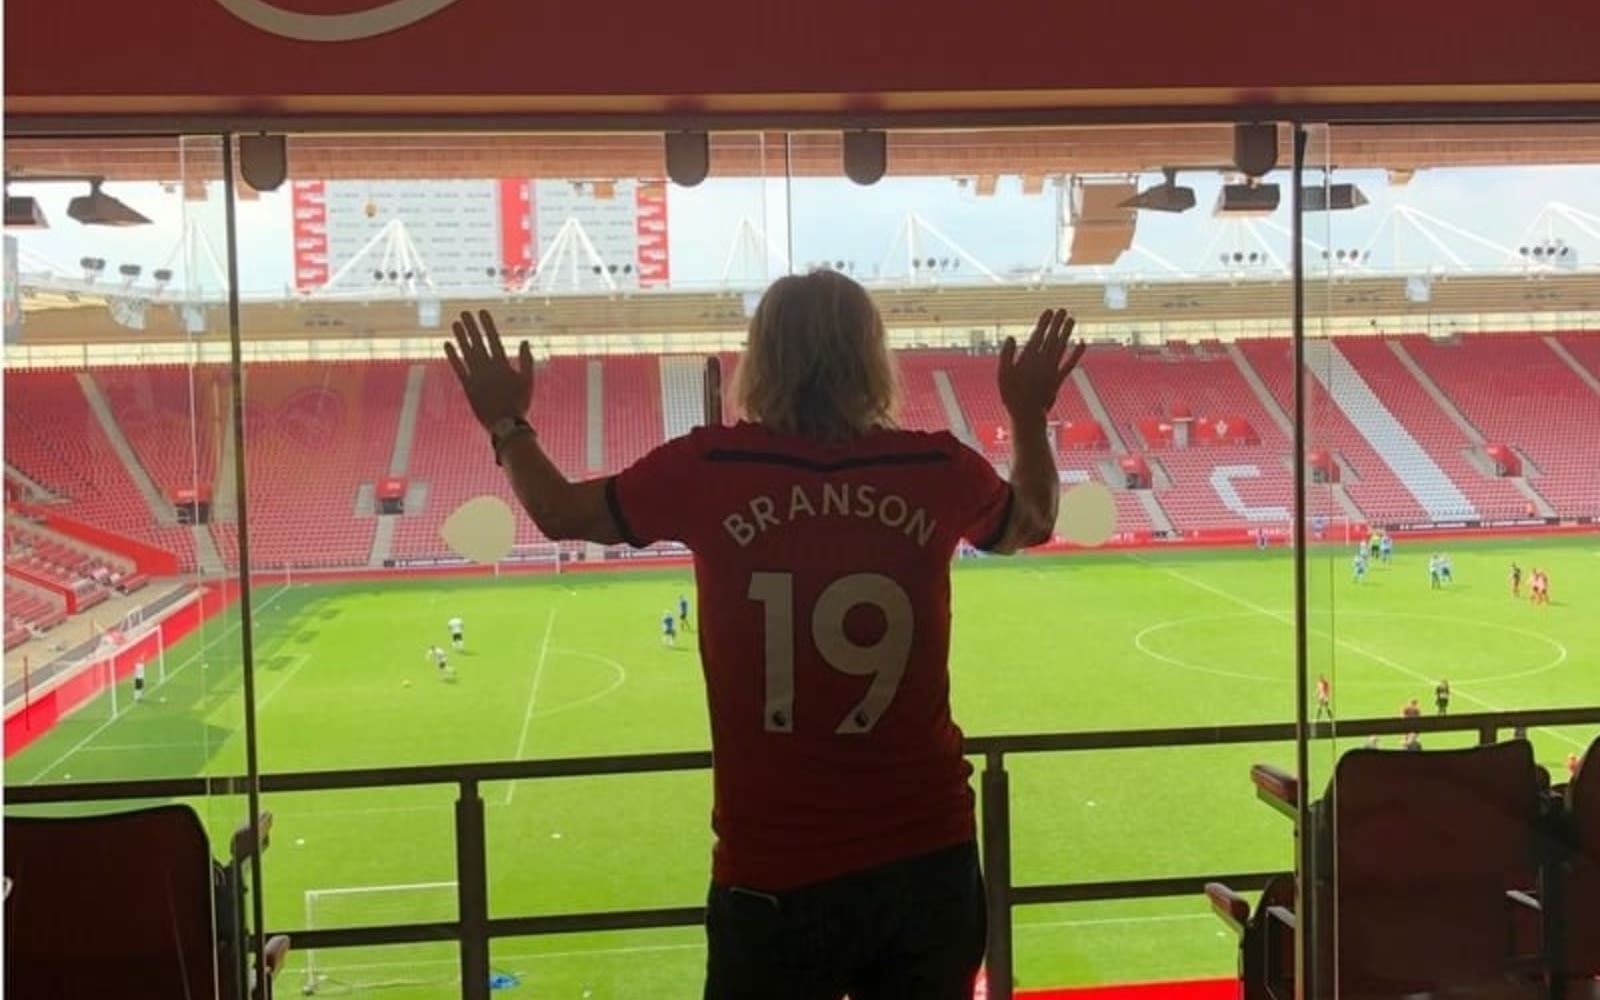 Richard Branson looking out at Southampton Football Club field in 2019